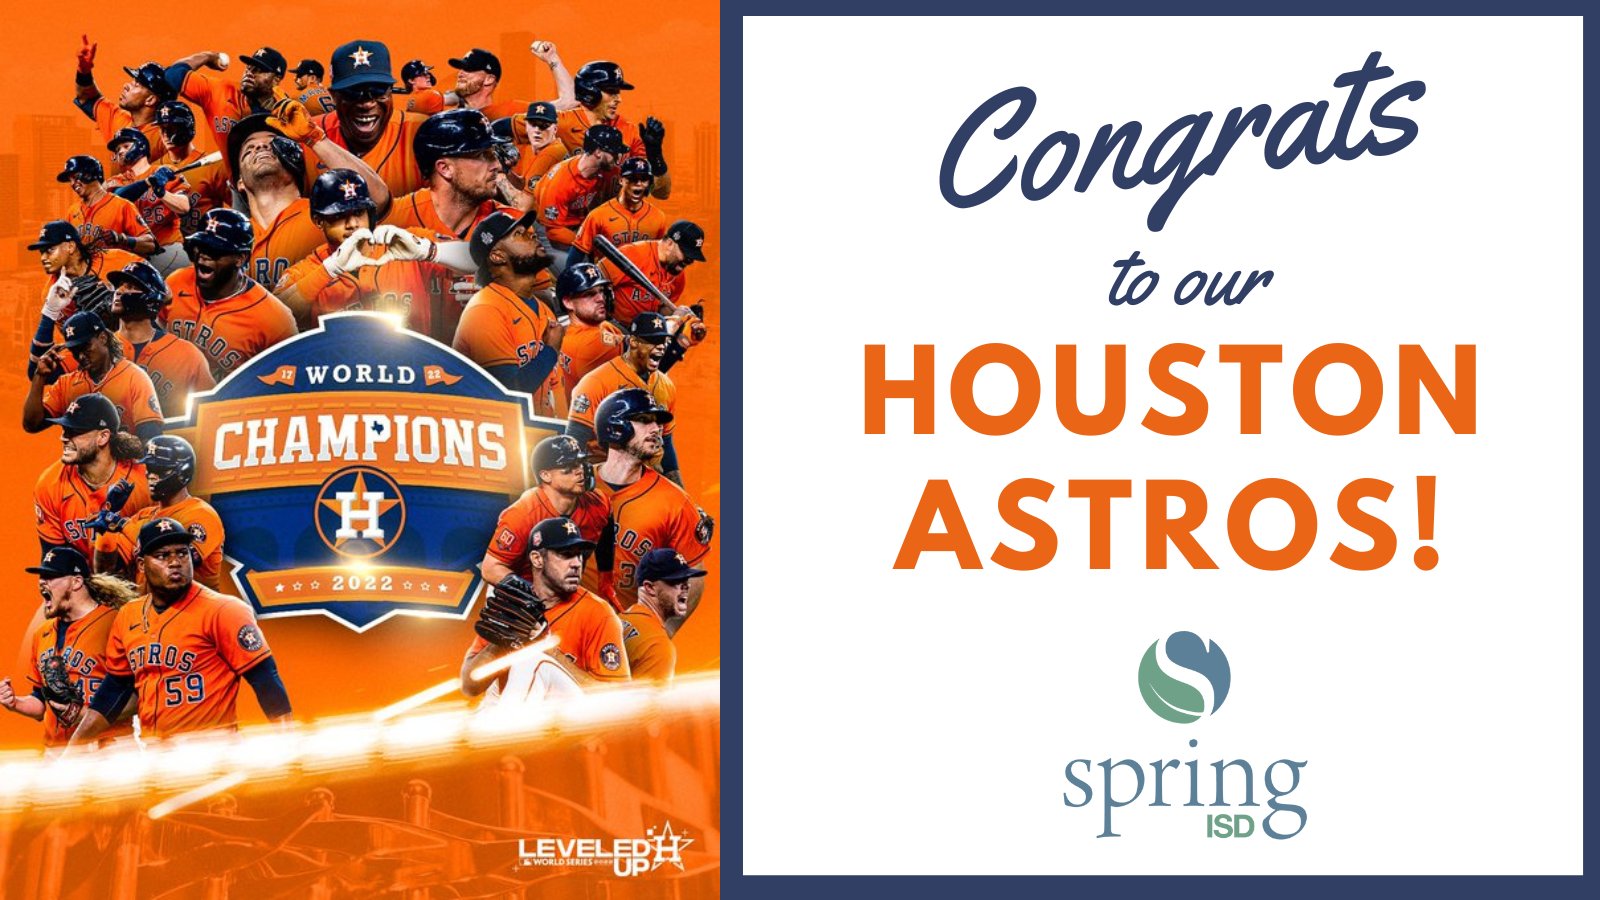 Spring ISD on X: Our Houston @Astros are #WorldSeries champs, again! To  celebrate, all staff are encouraged to wear jeans and Astros gear tomorrow  (Mon, 11/7)! ⚾️🏆 As a reminder, tomorrow remains